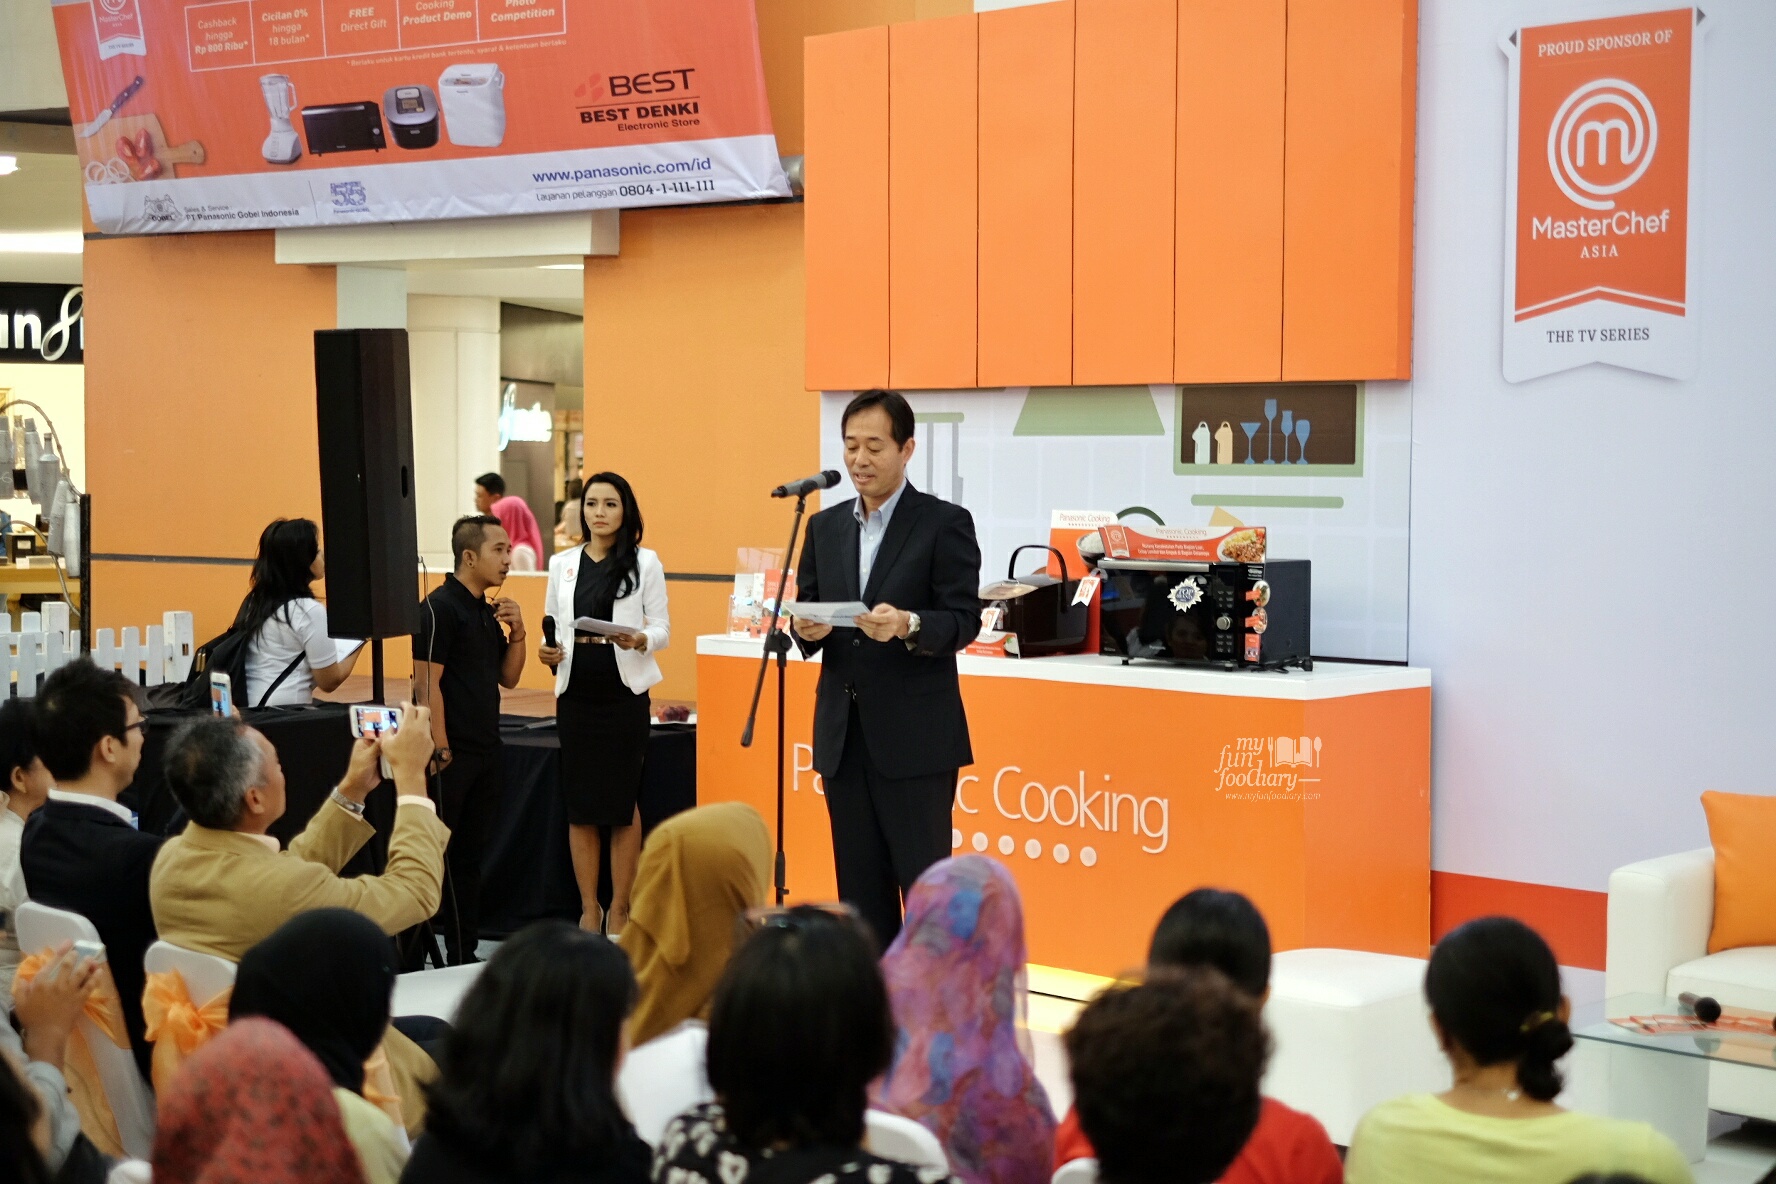 Welcome Speech at Panasonic Cooking by Myfunfoodiary